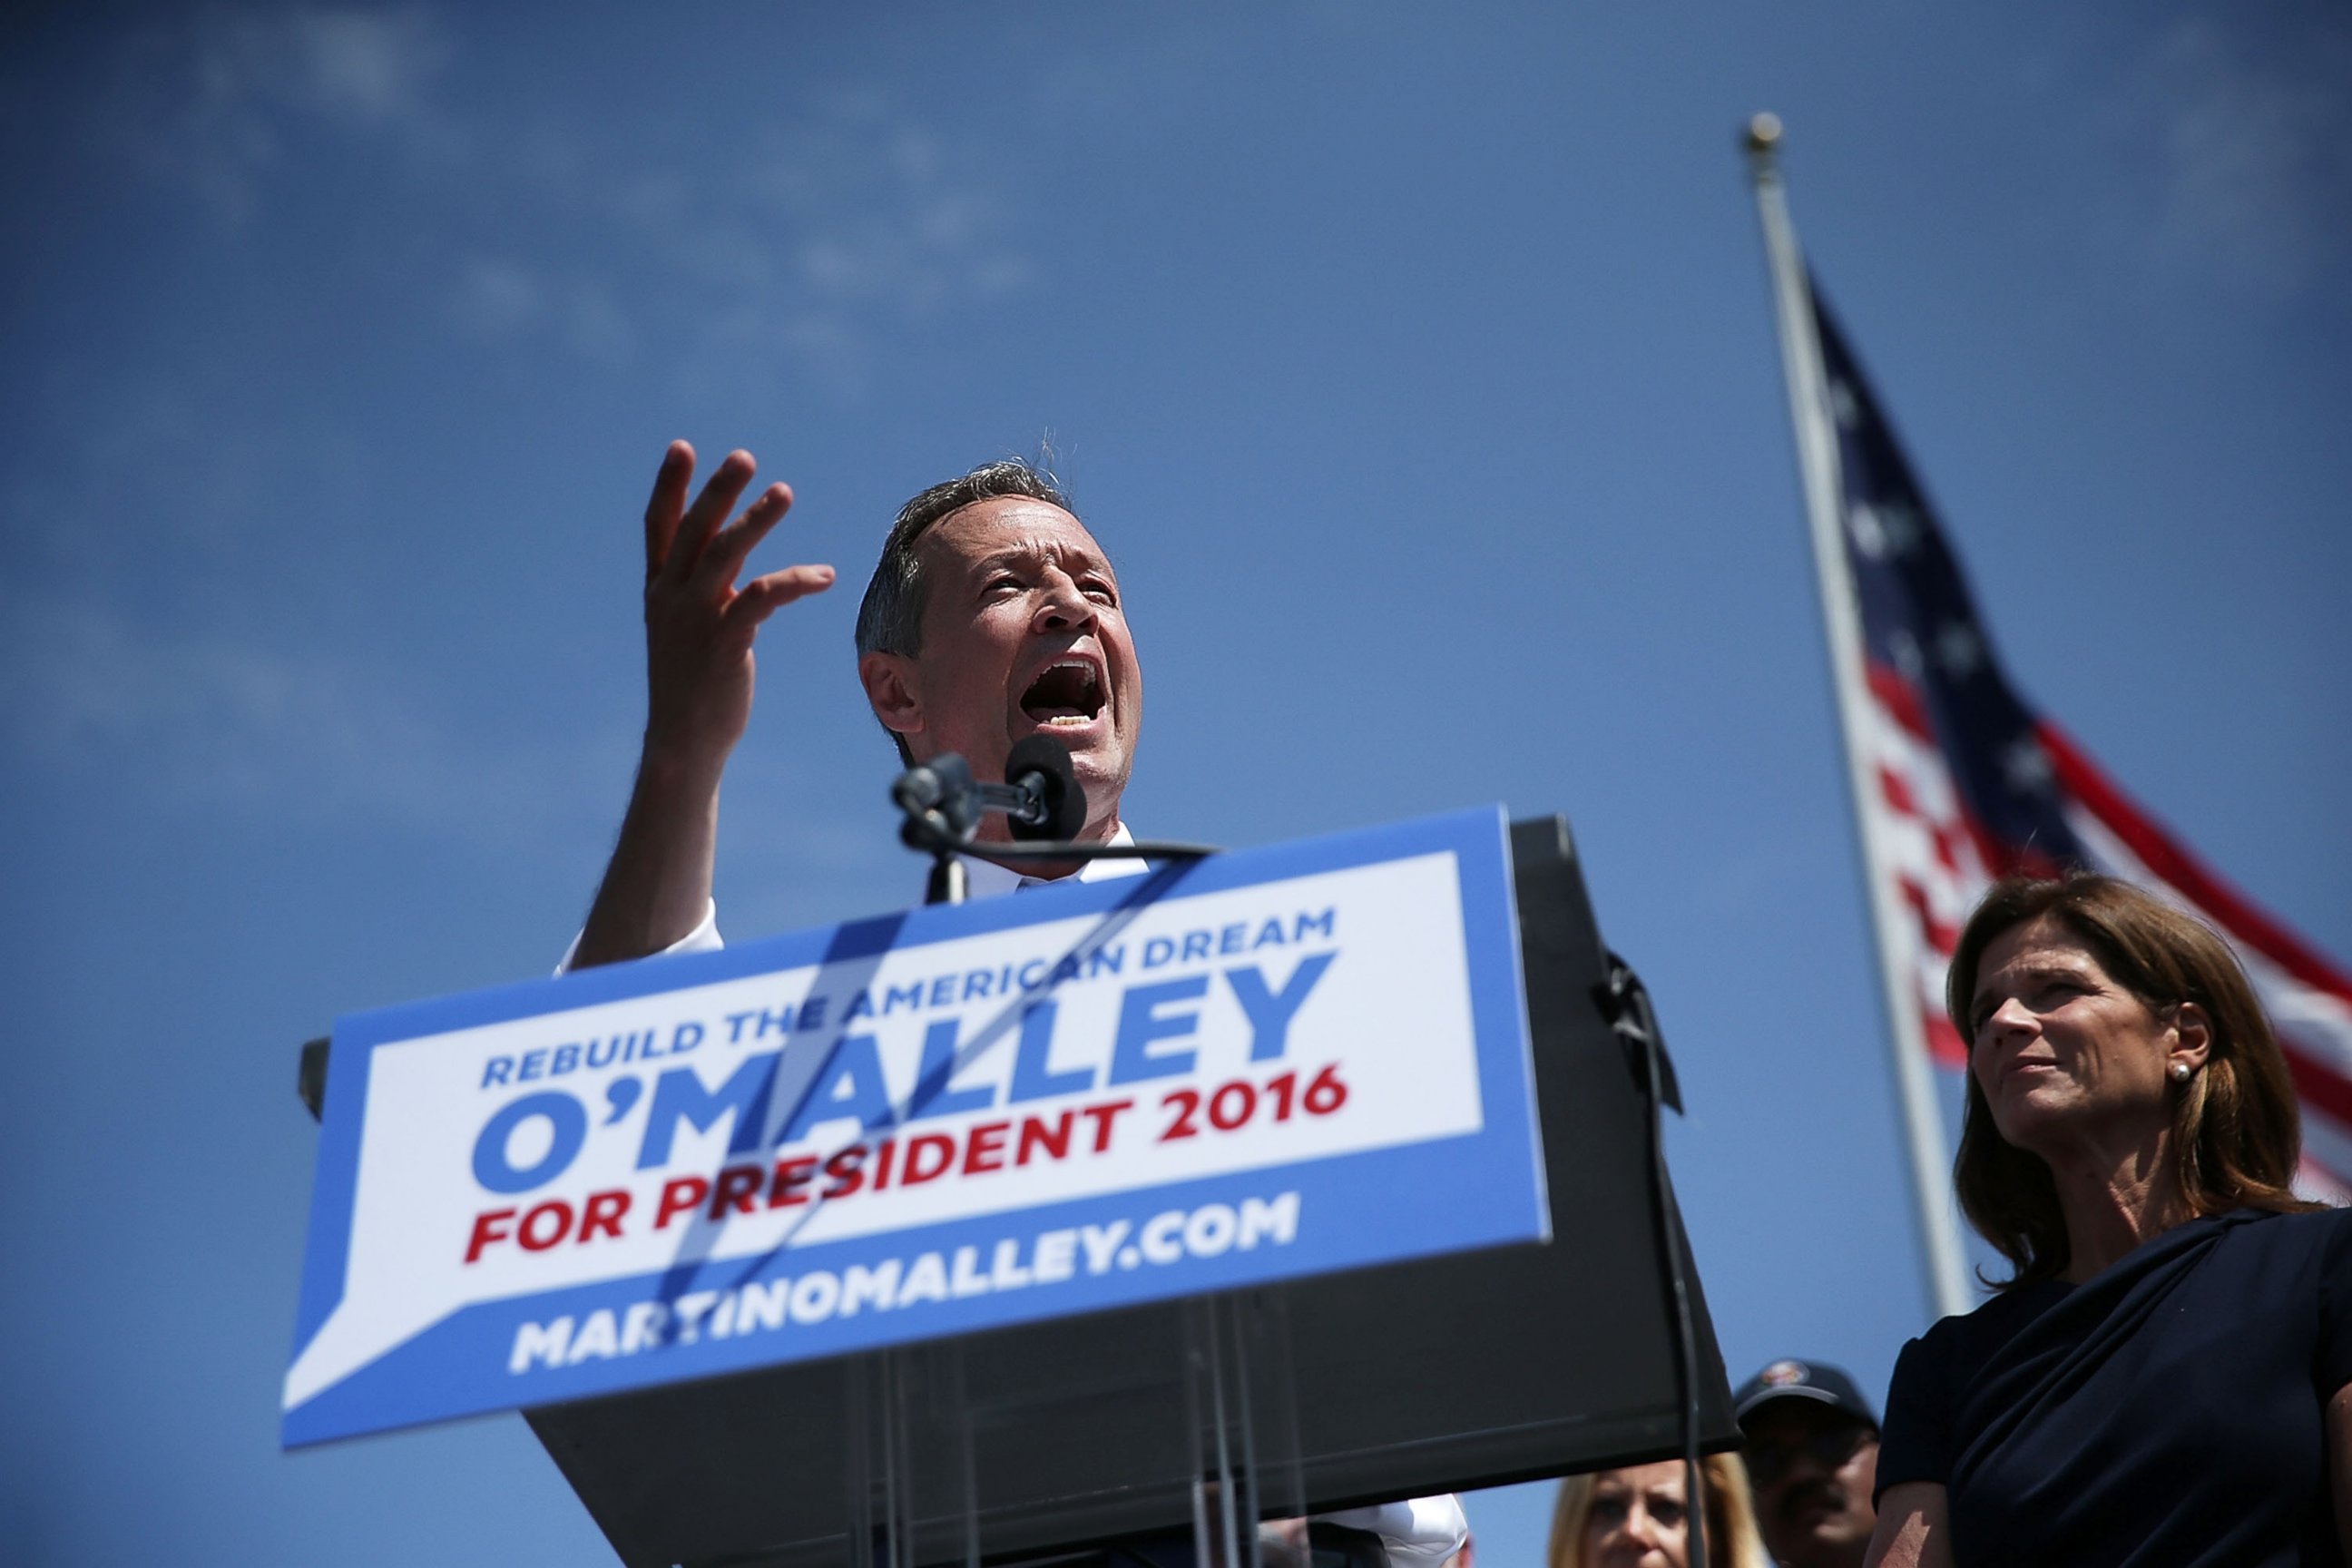 PHOTO: Former Maryland Gov. Martin O'Malley speaks as his wife Katie looks on during an event to announce his candidacy for a presidential campaign May 30, 2015 at Federal Hill Park in Baltimore, Md.